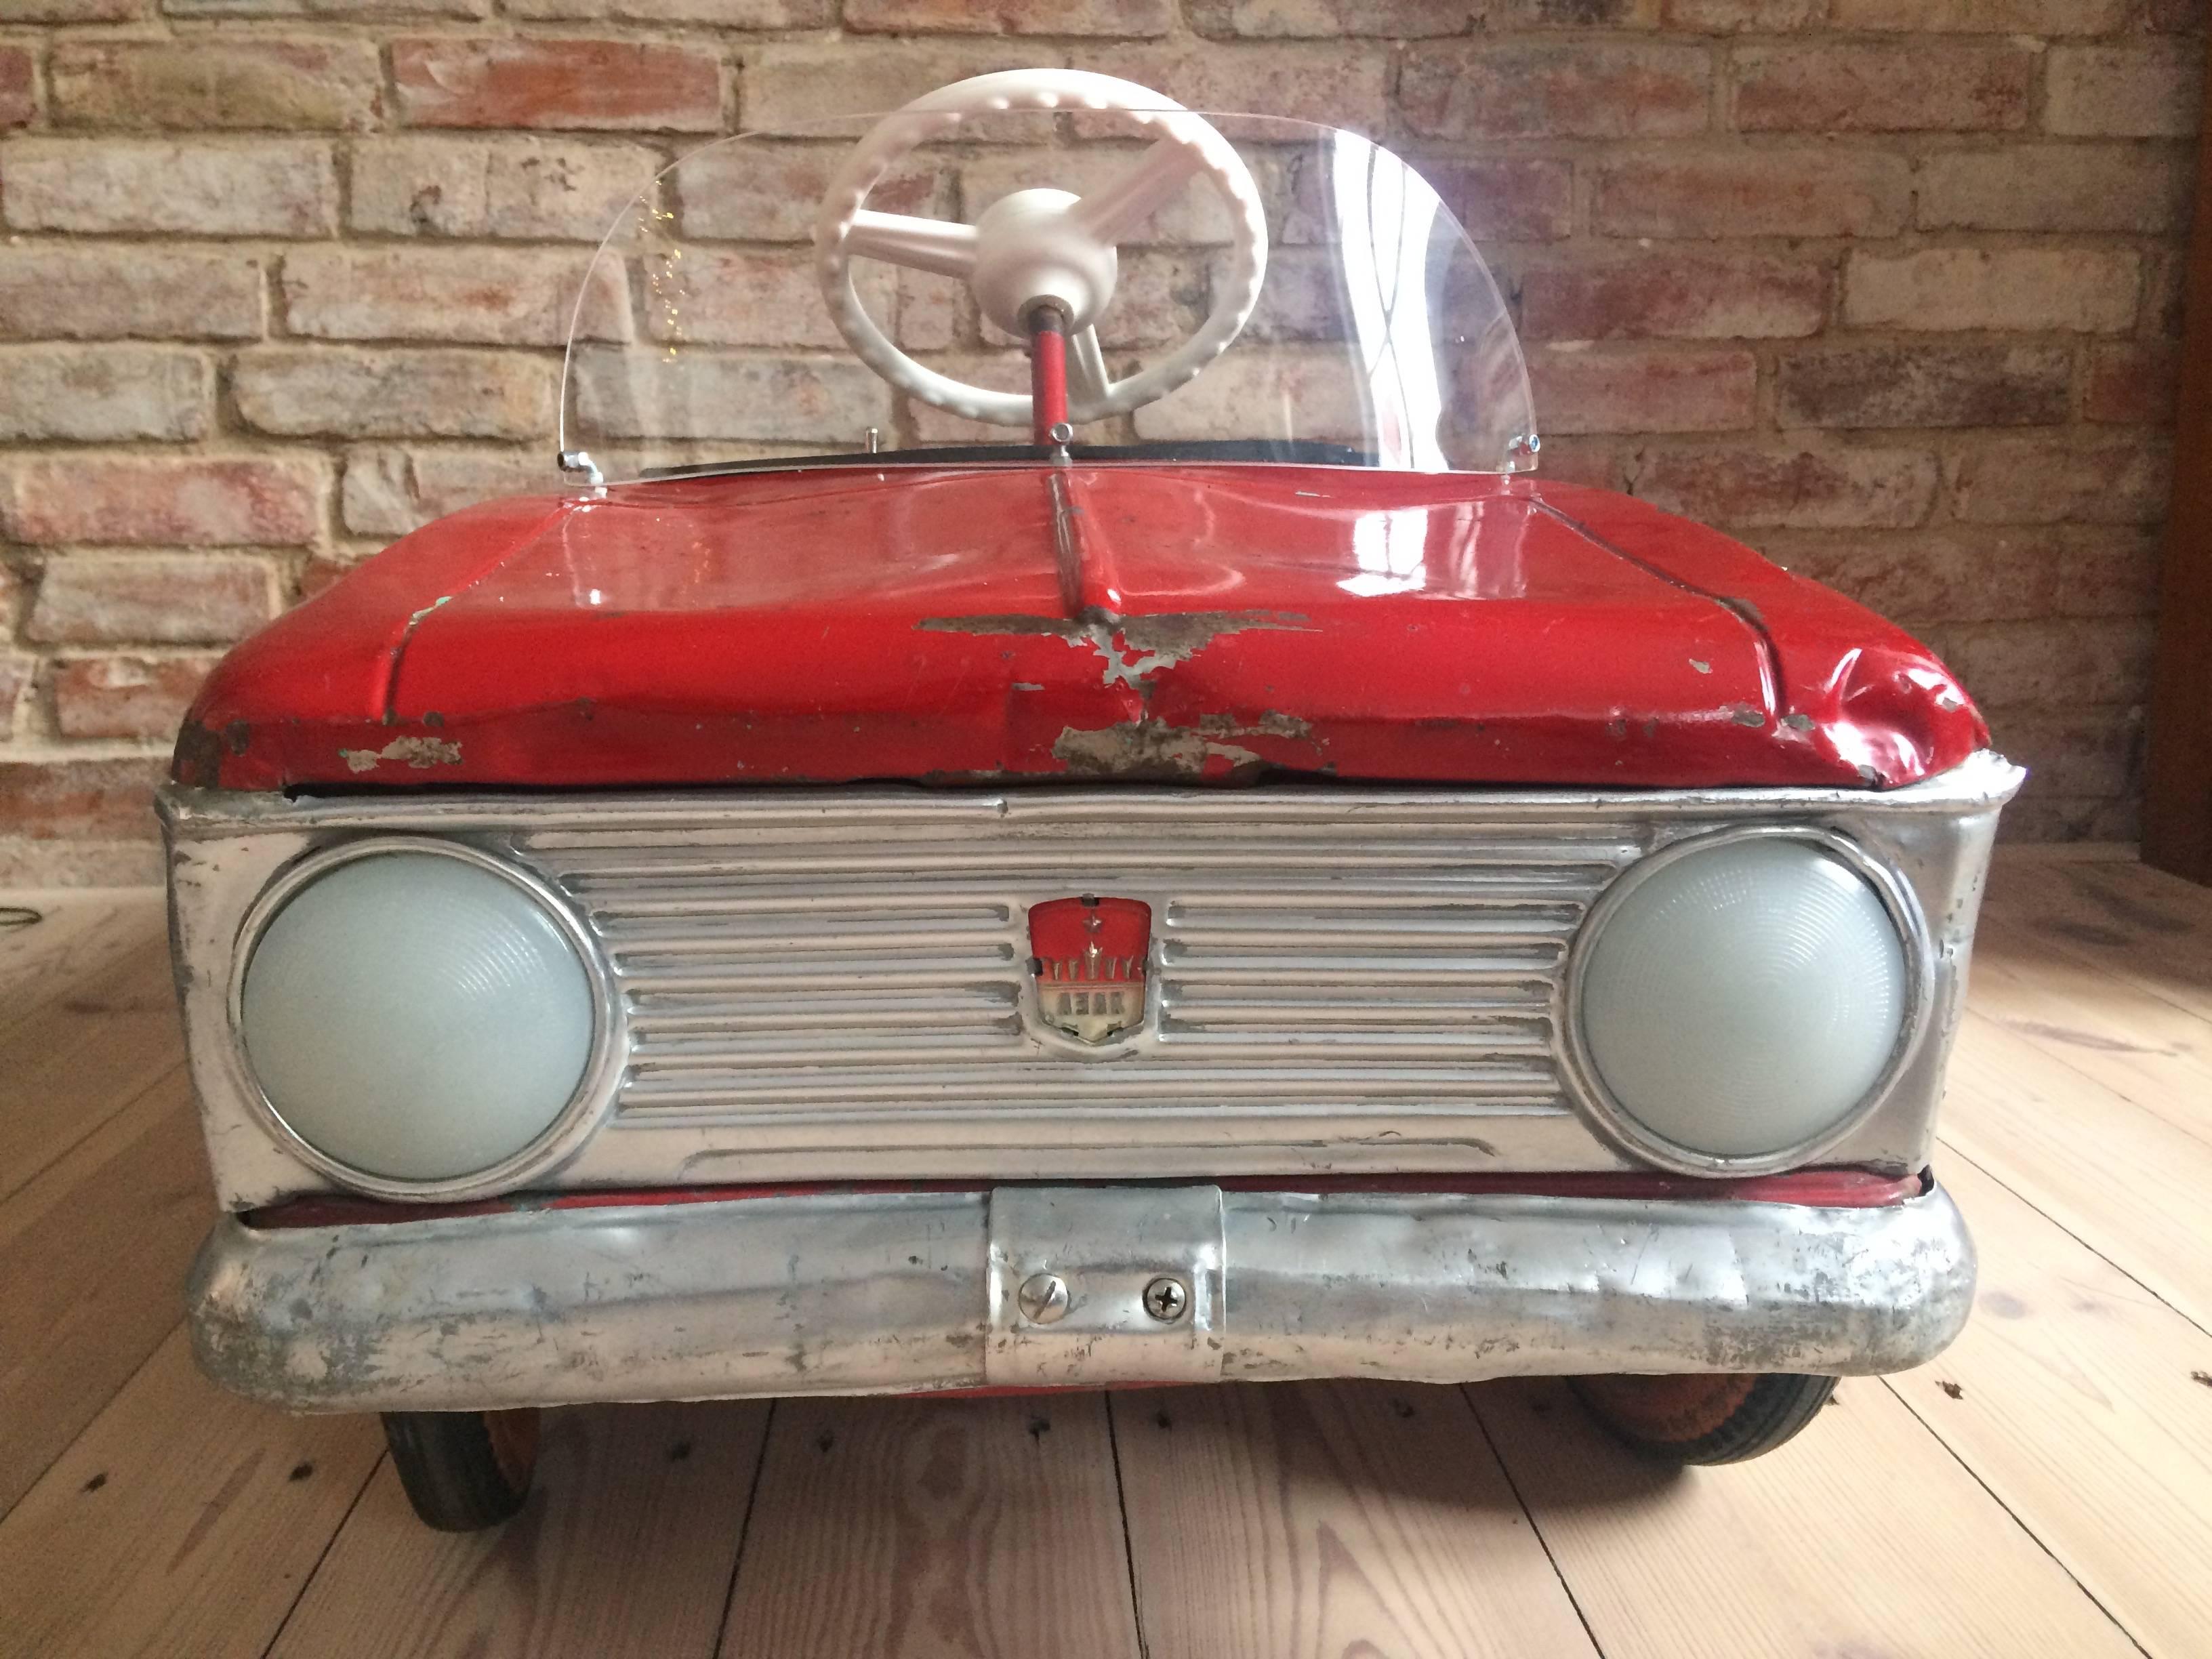 This early Soviet child's pedal car was manufactured during the communist era in former Czechoslovakia. It was created as a model for children as a small copy of the original Moskvich car and works on a pedal moving system. The piece features fully